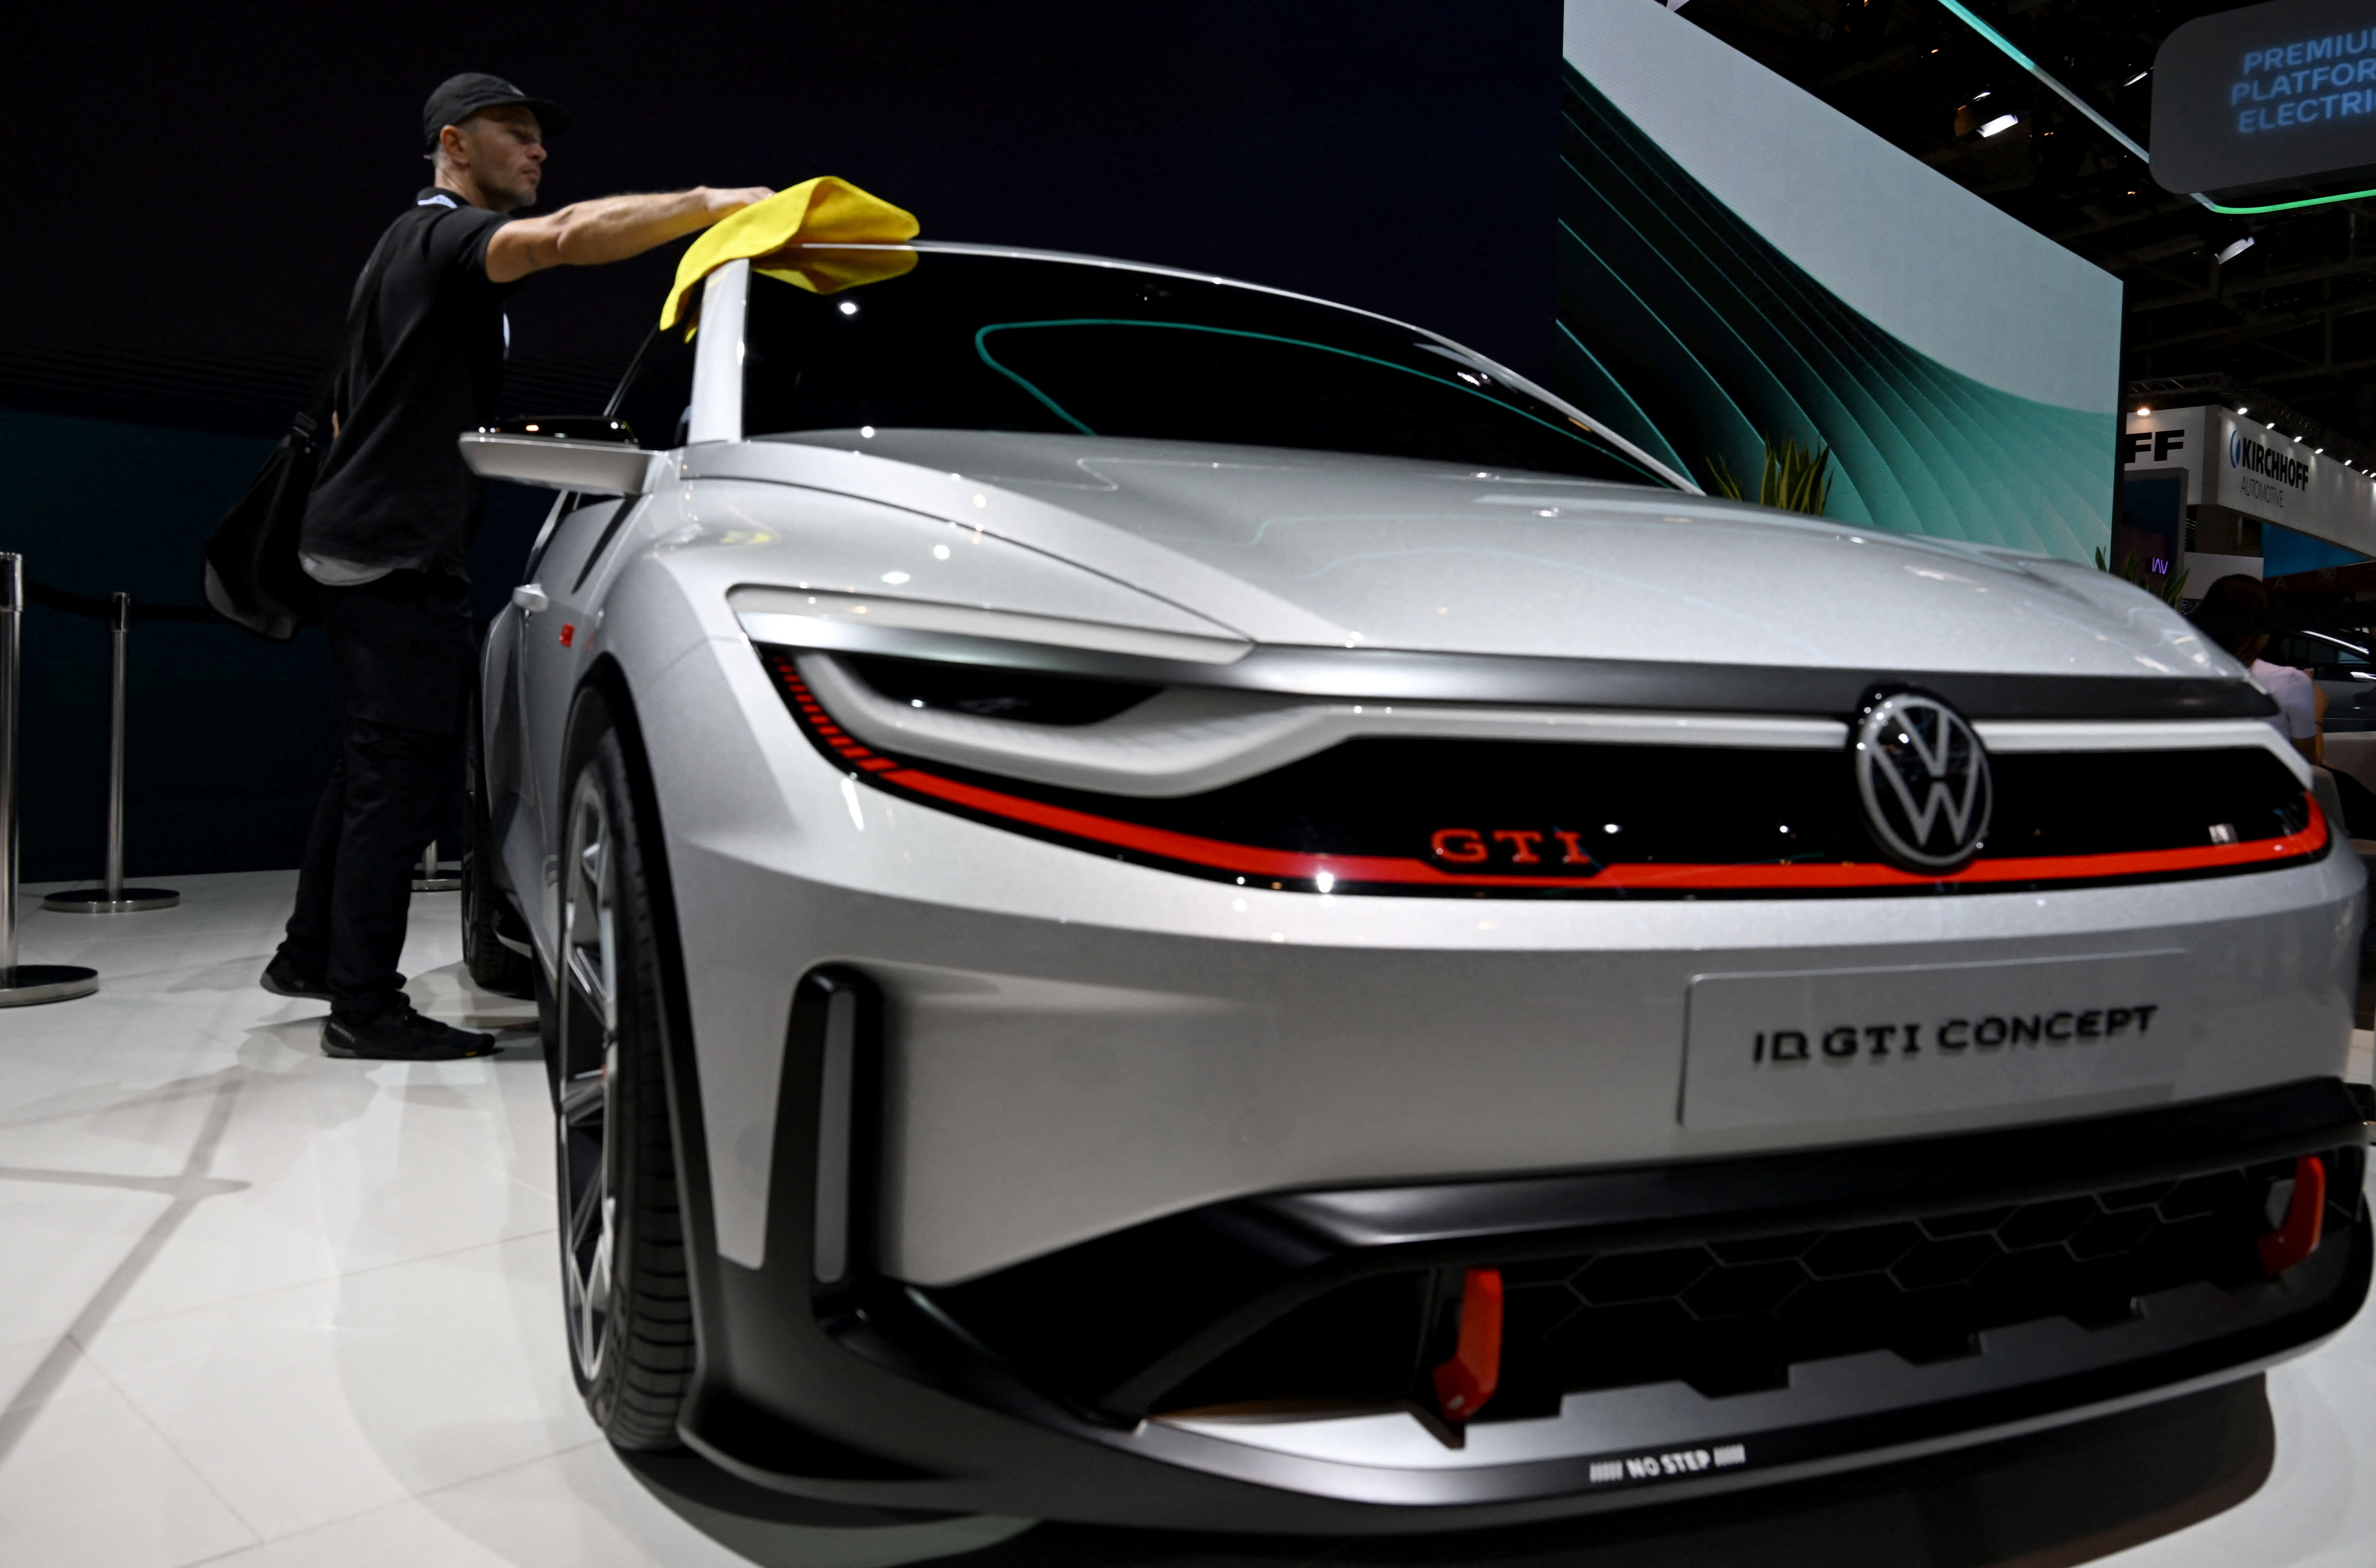 Volkswagen's profits fall 20% in the first quarter due to lower sales